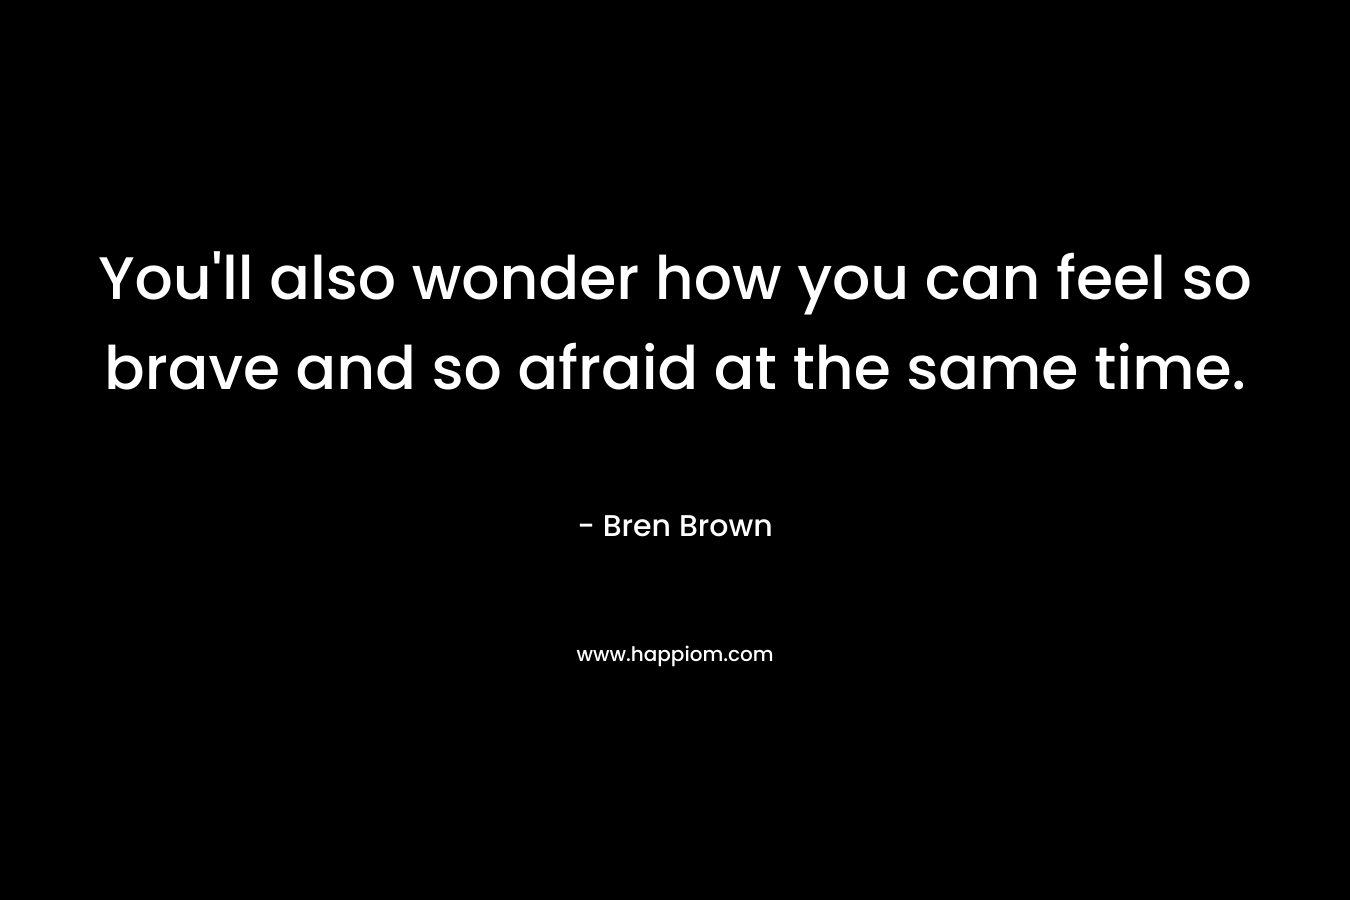 You'll also wonder how you can feel so brave and so afraid at the same time.